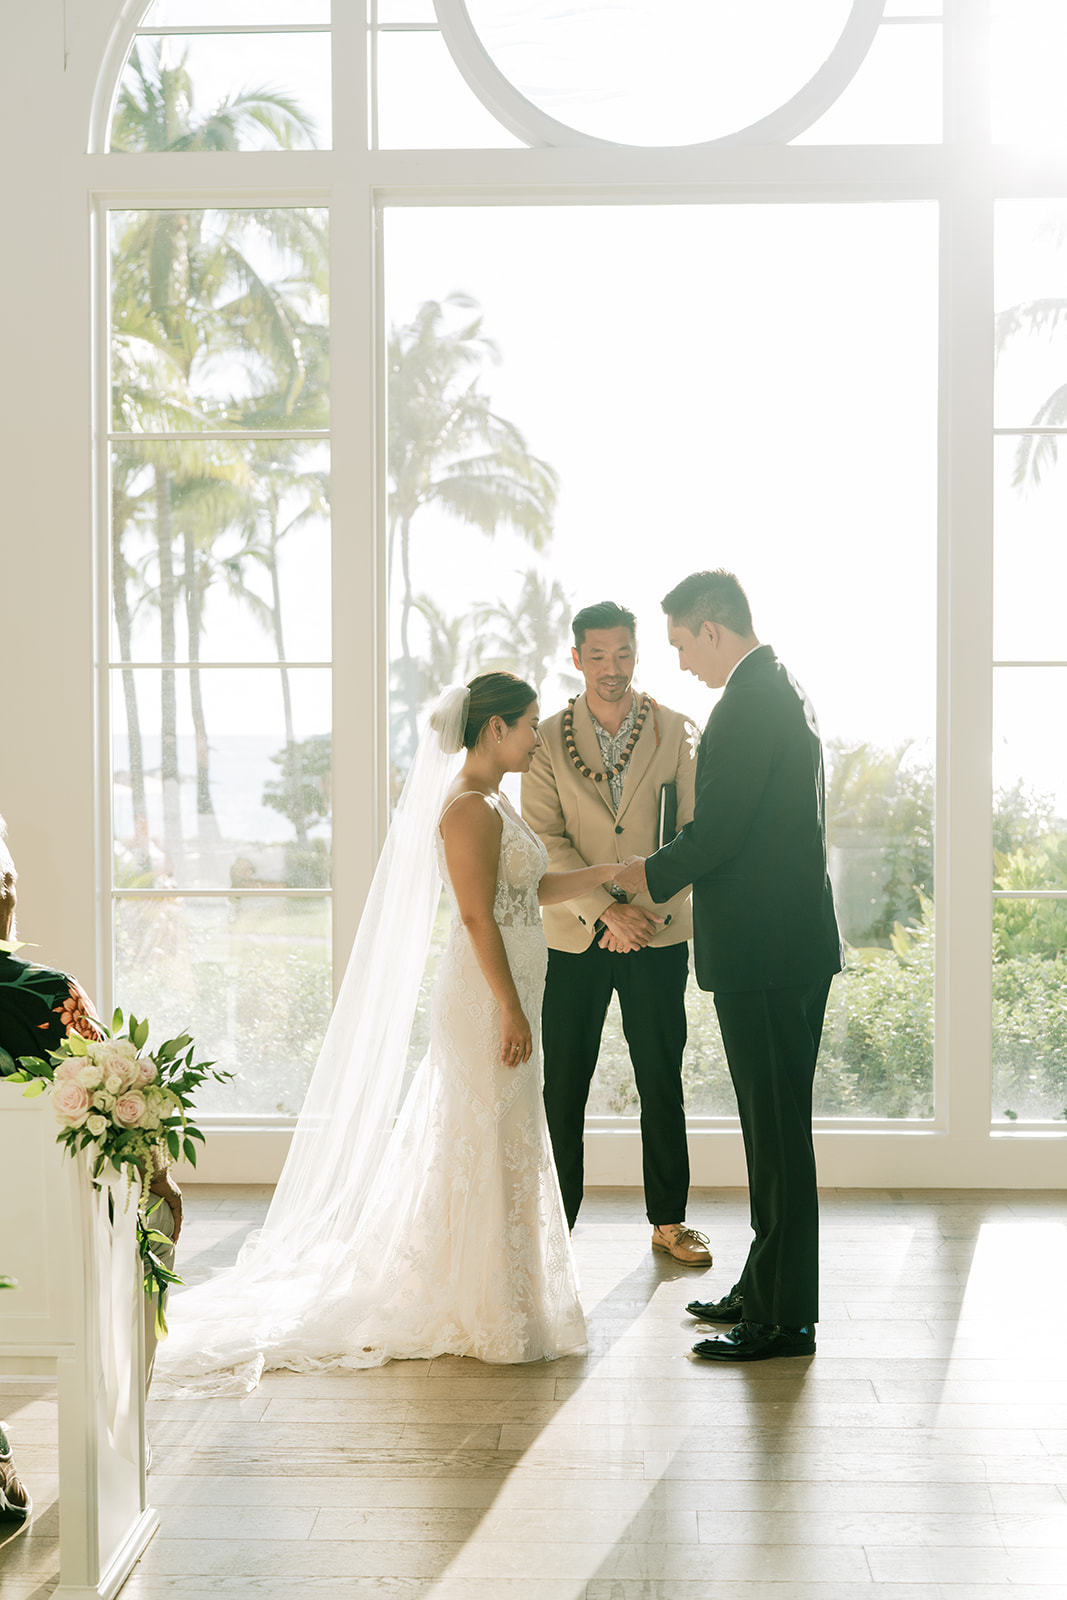 Groom putting in the wedding ring to his bride's finger captured by Megan Moura Wedding Photographer